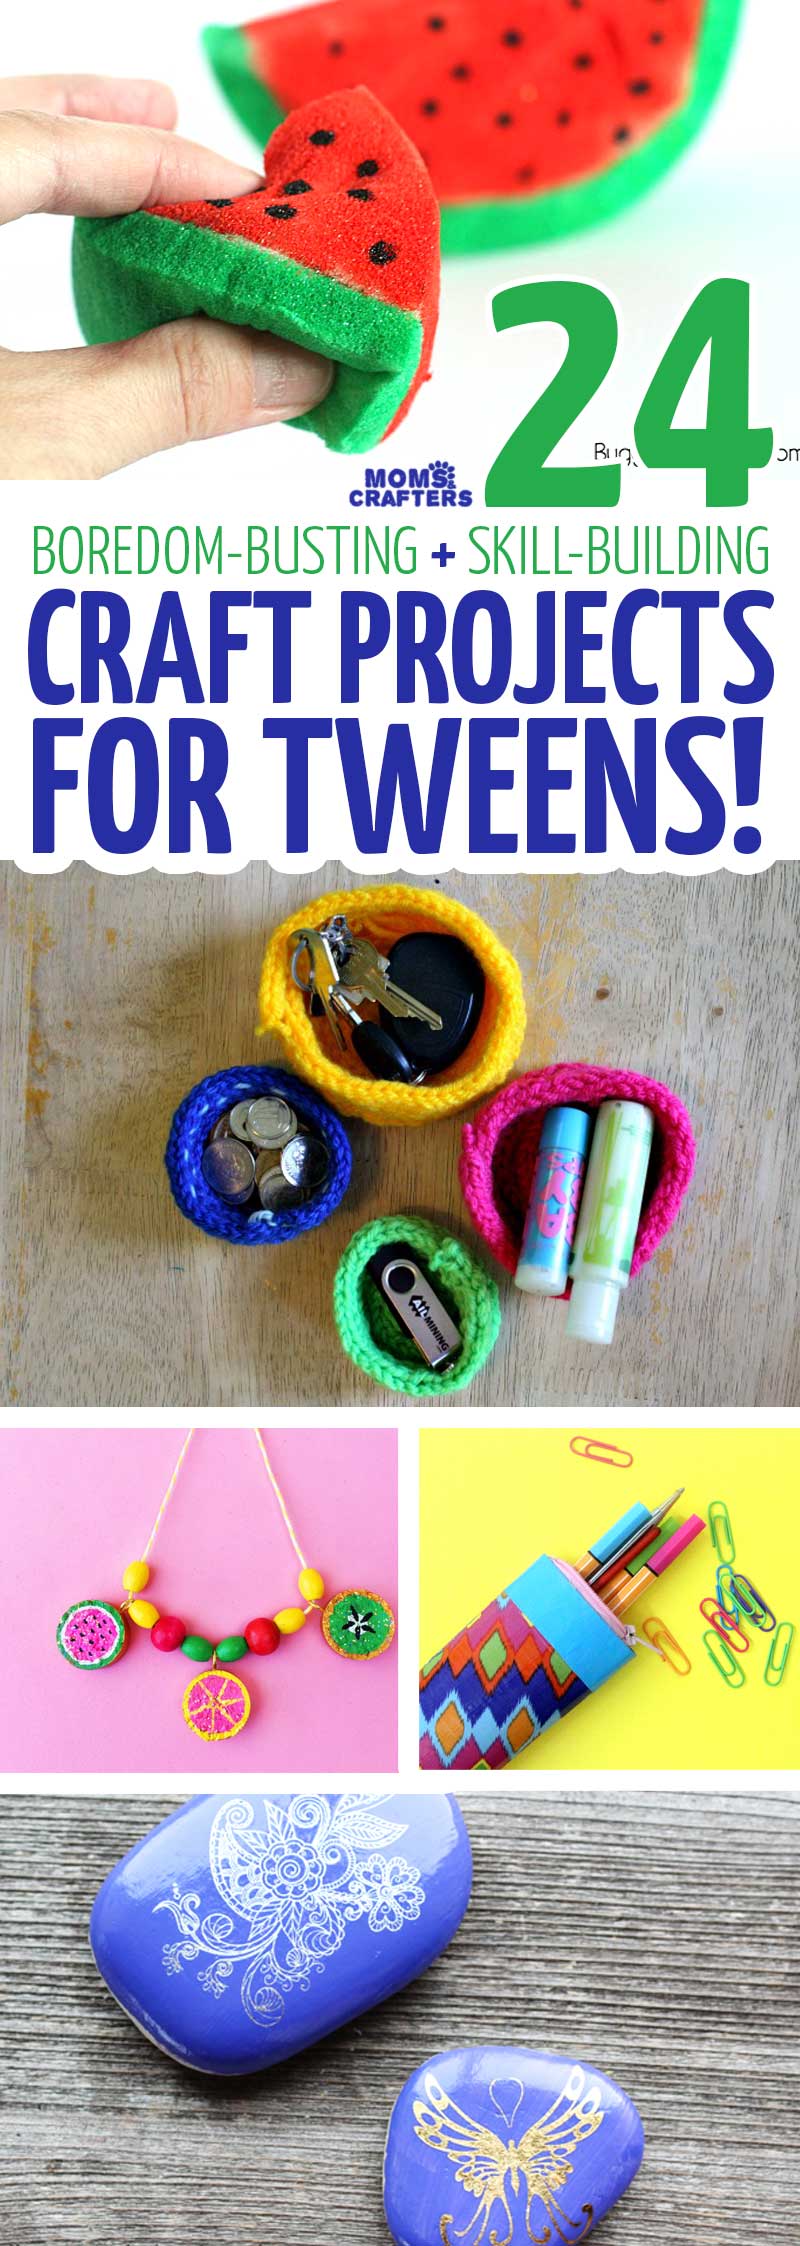 40+ Easy Crafts for Teens & Tweens - Happiness is Homemade